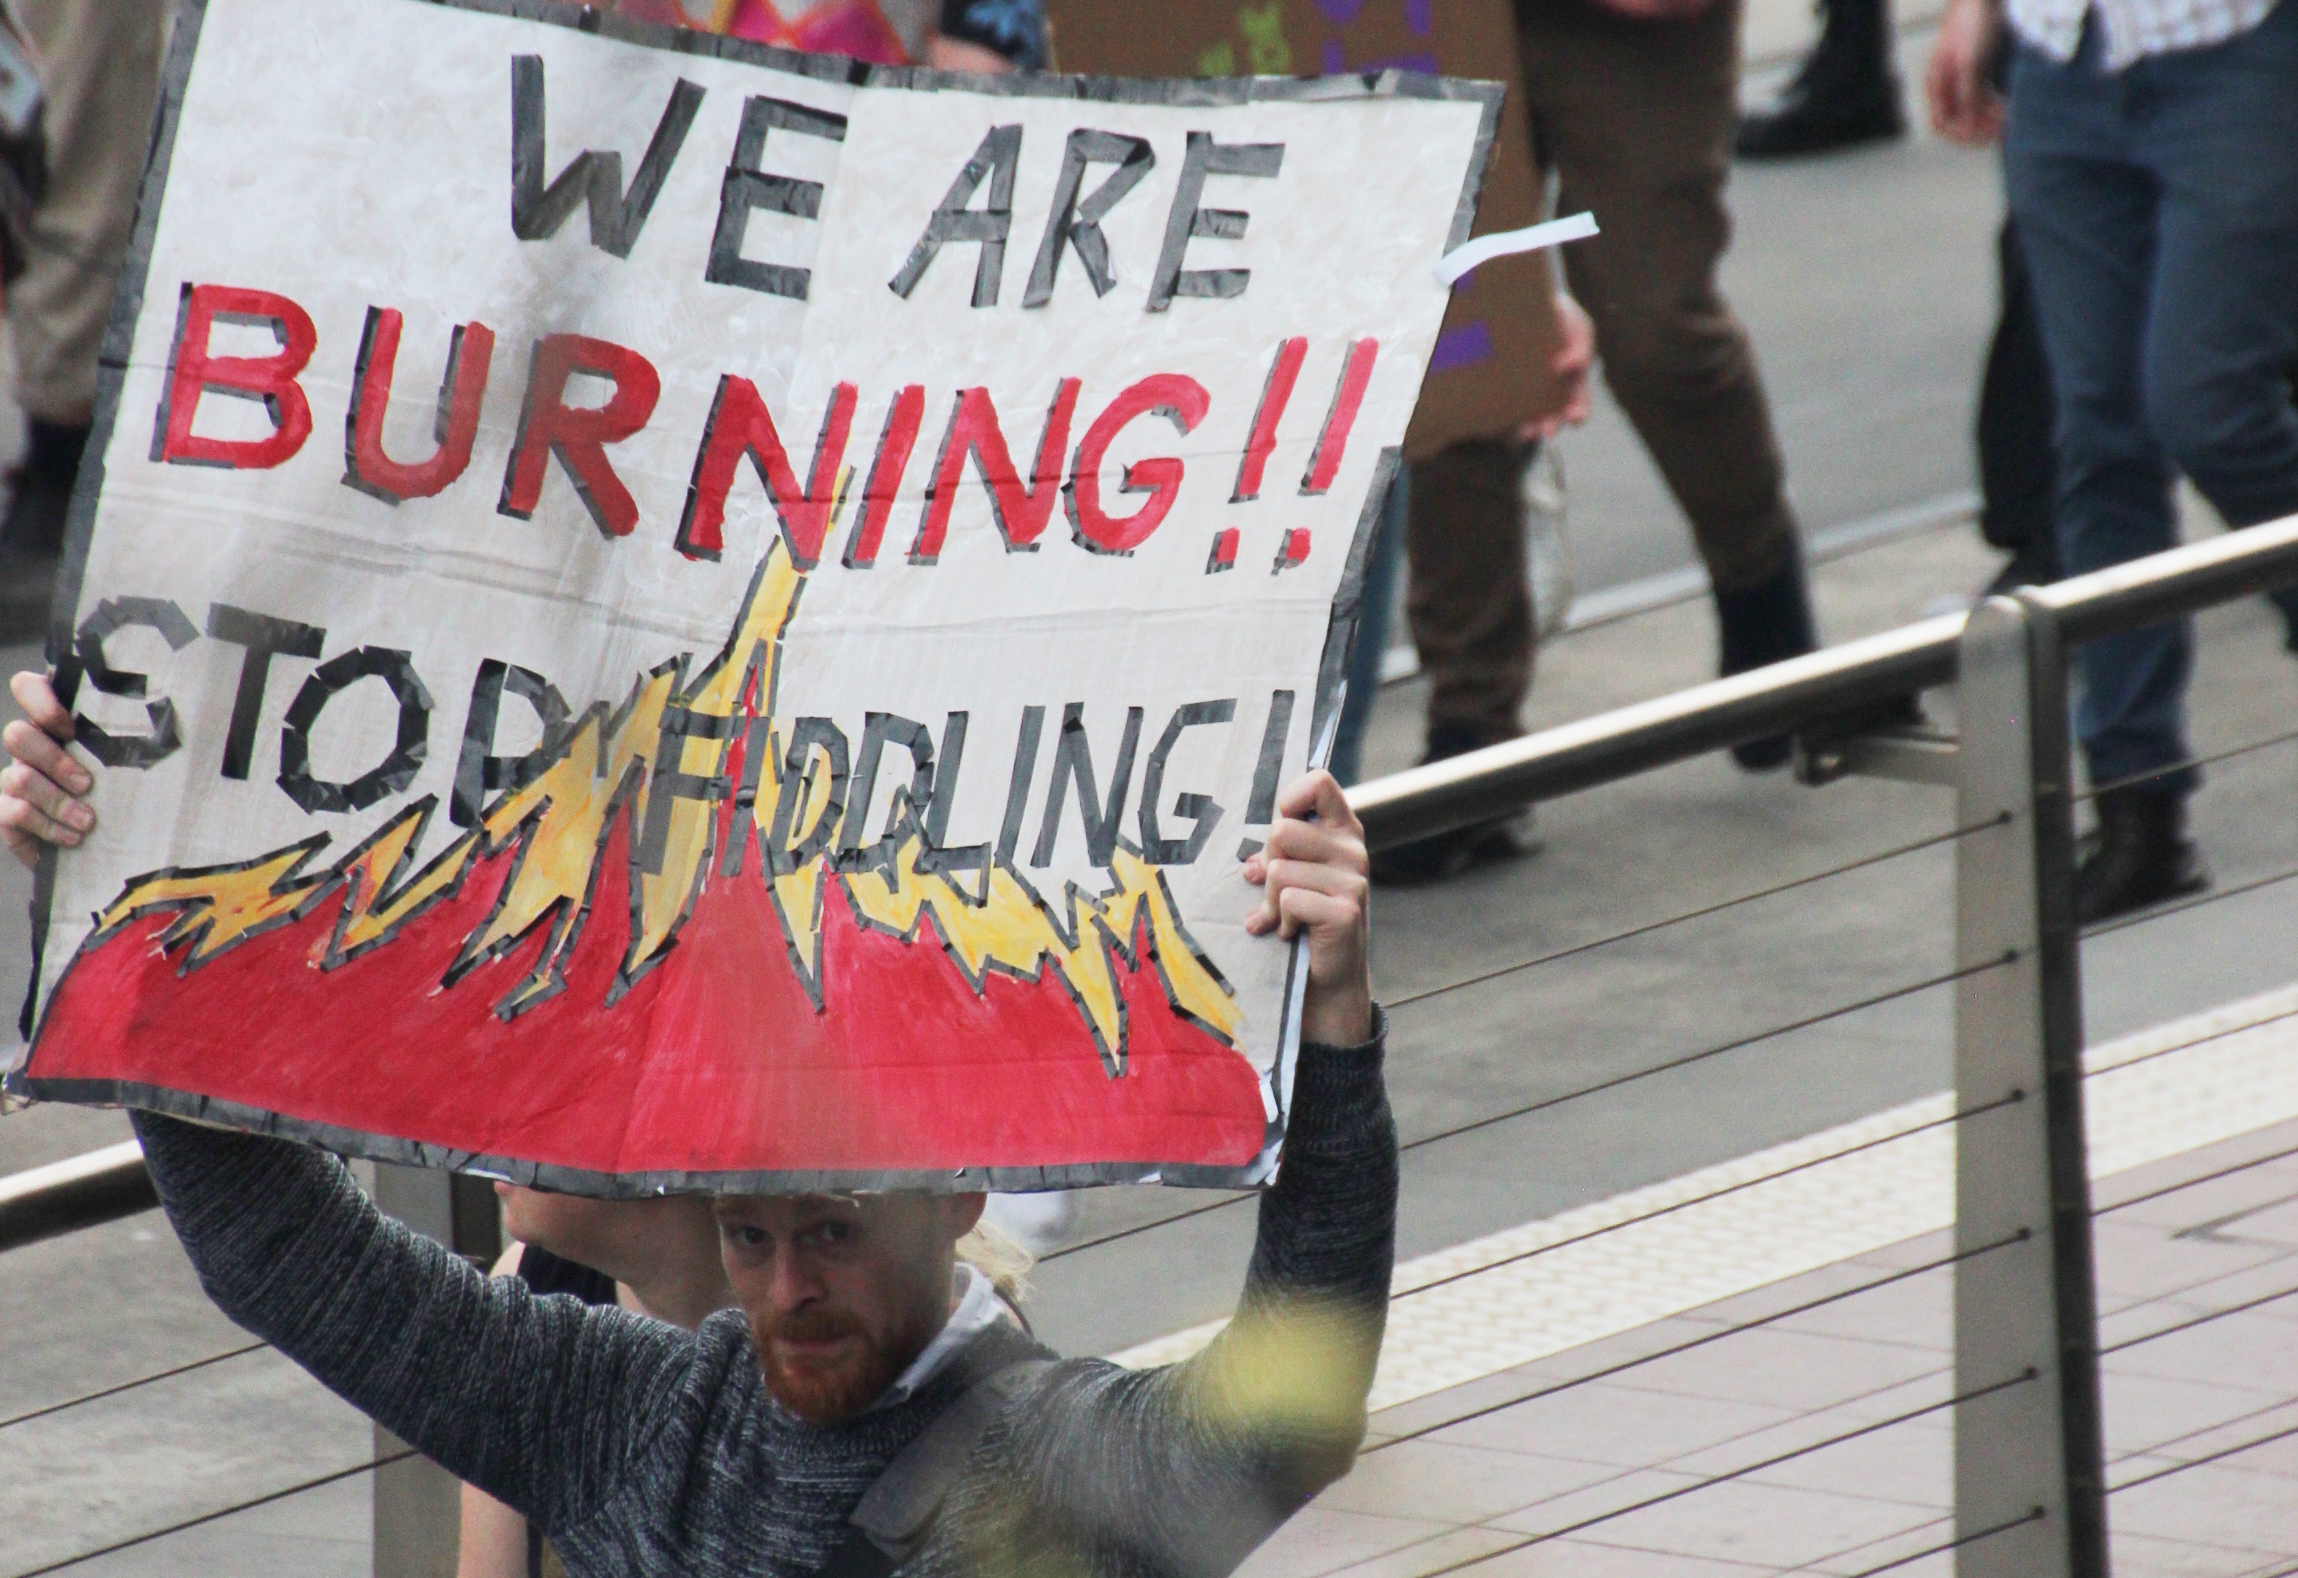 We are burning, stop fiddling!